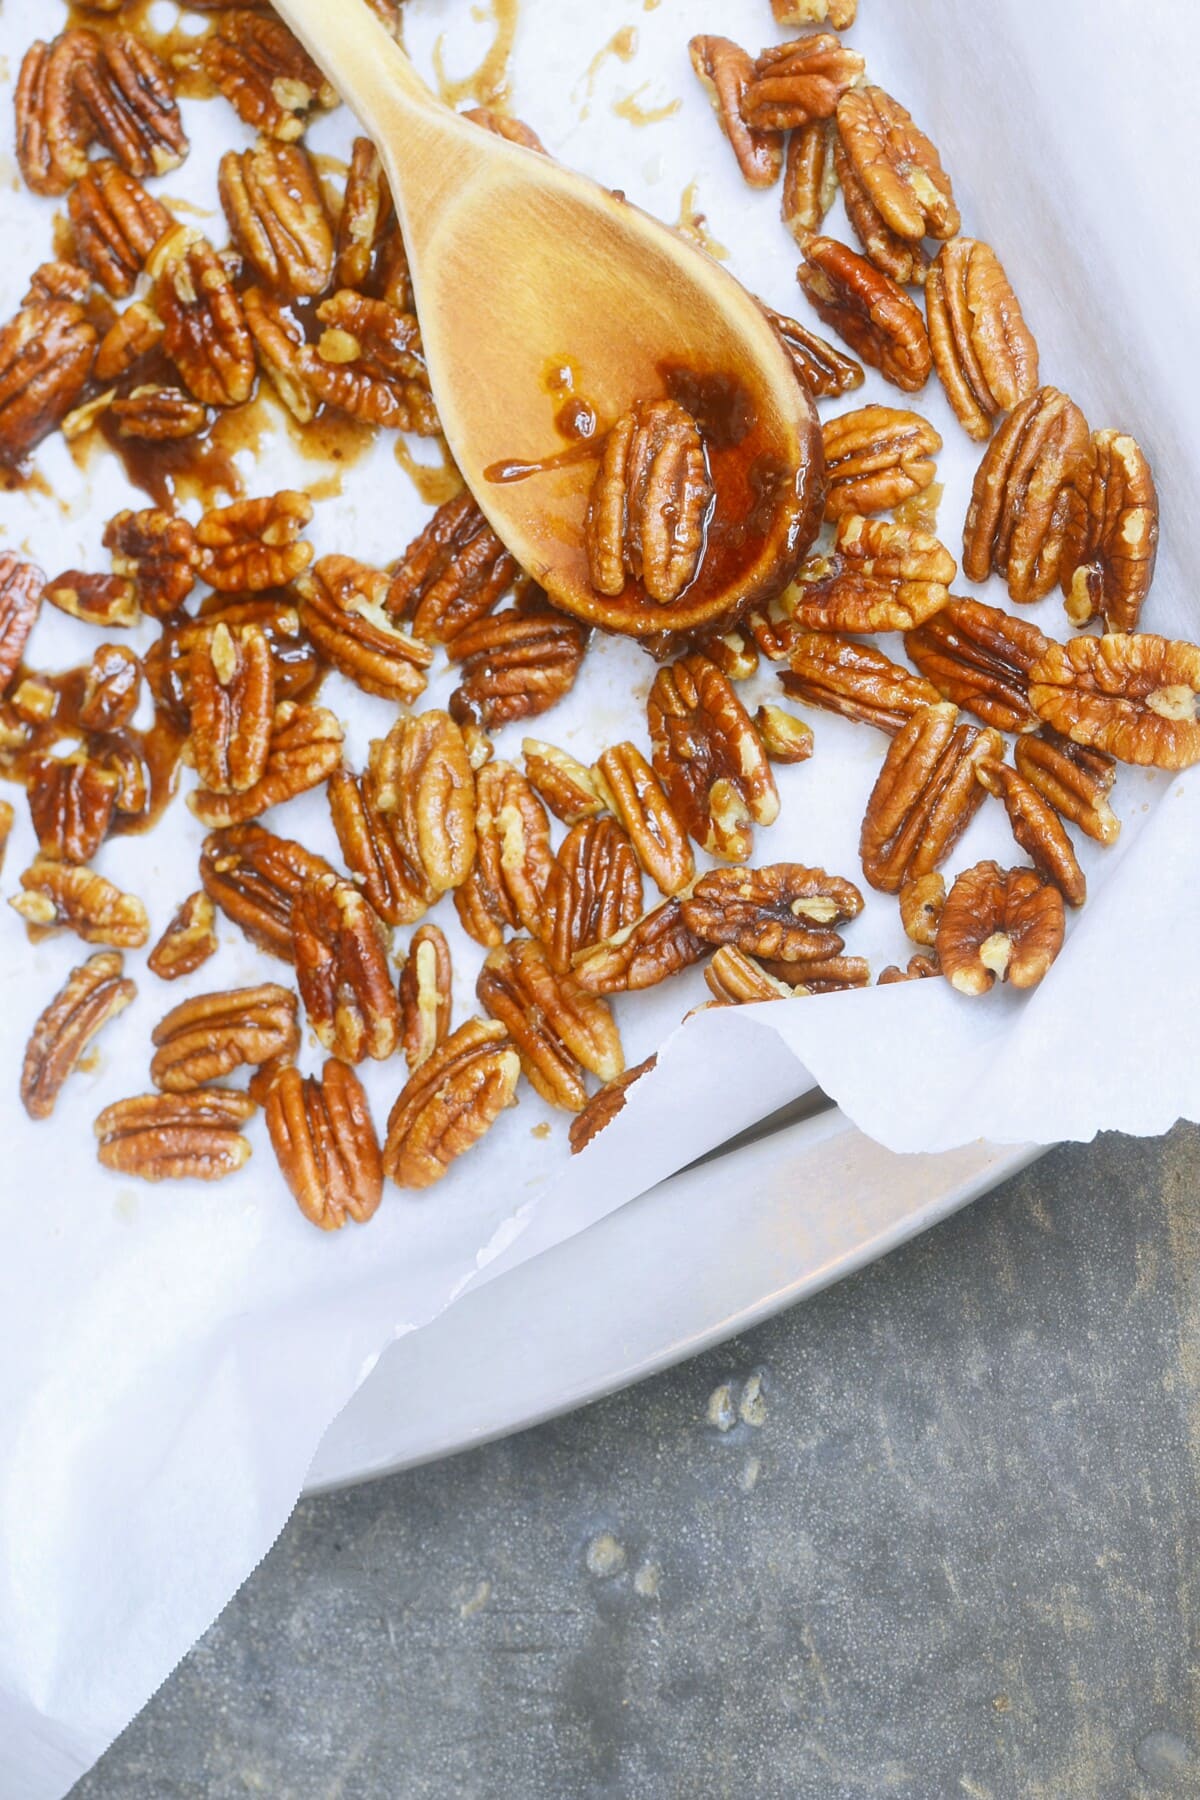 Candied pecans anyone??? Learning to use my new candy nut machine. It  should cut down my time in making these delectable creations., By  Worthington Pecan Farm